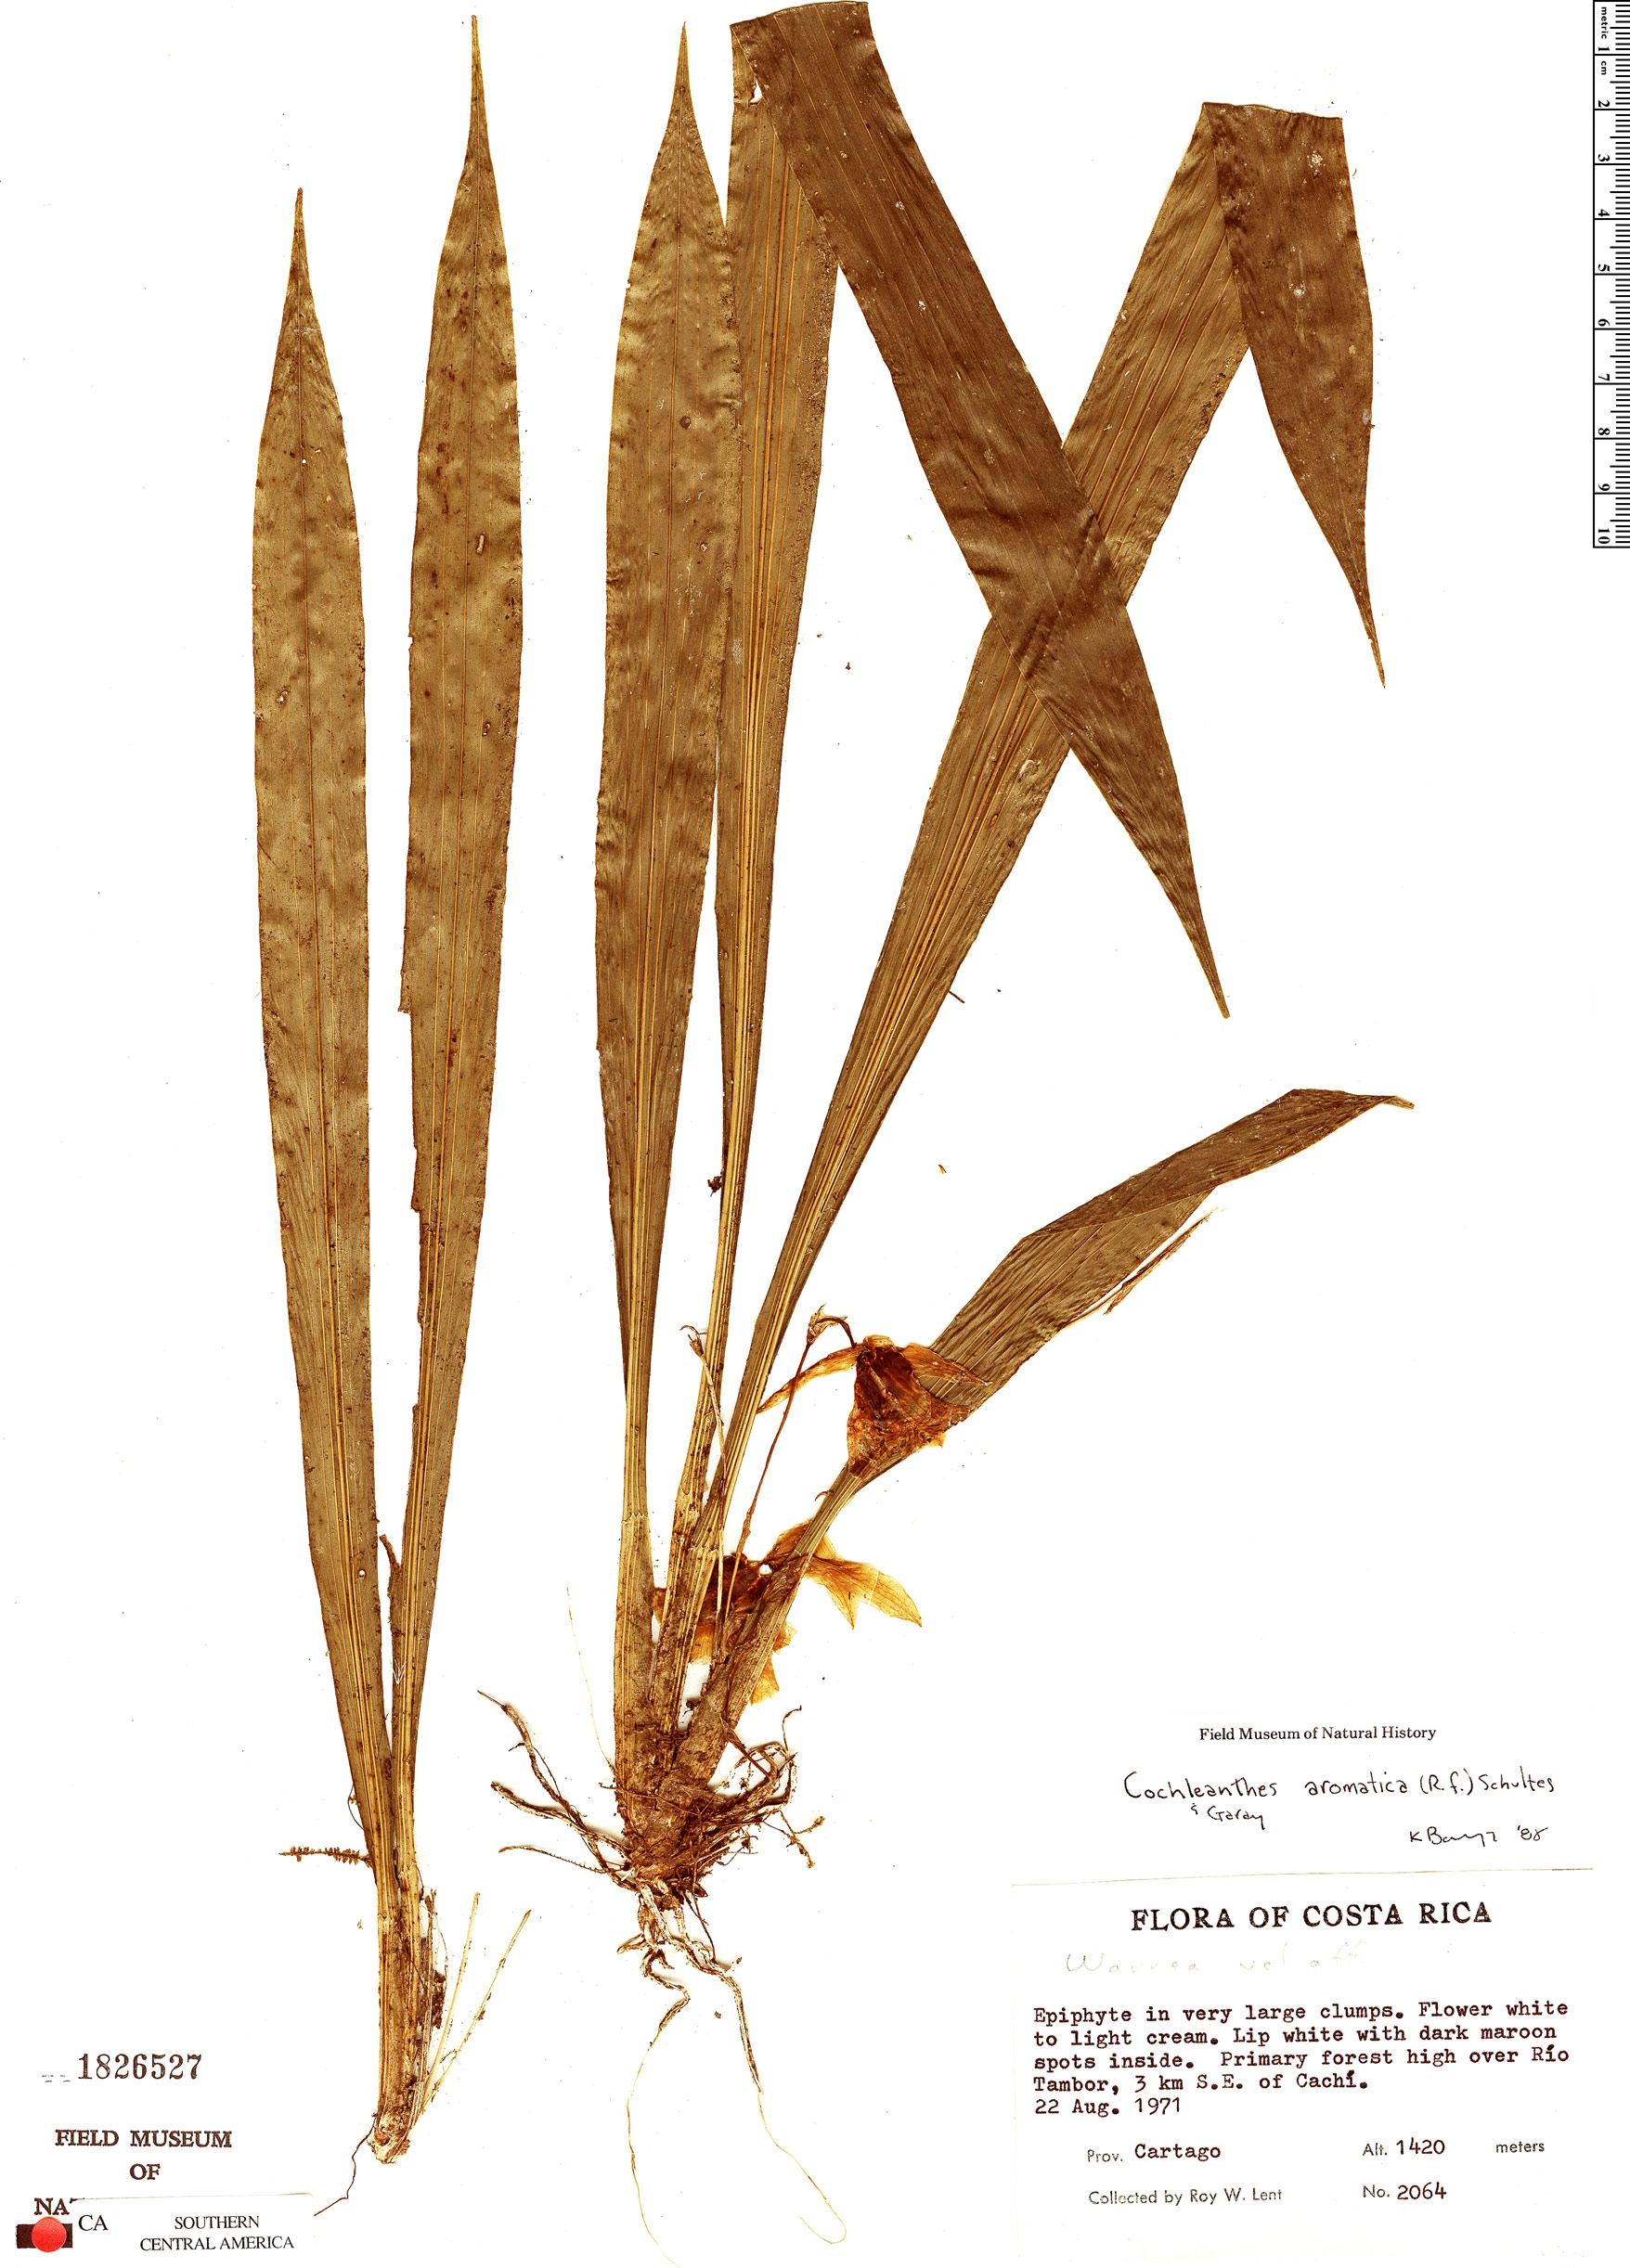 Cochleanthes image